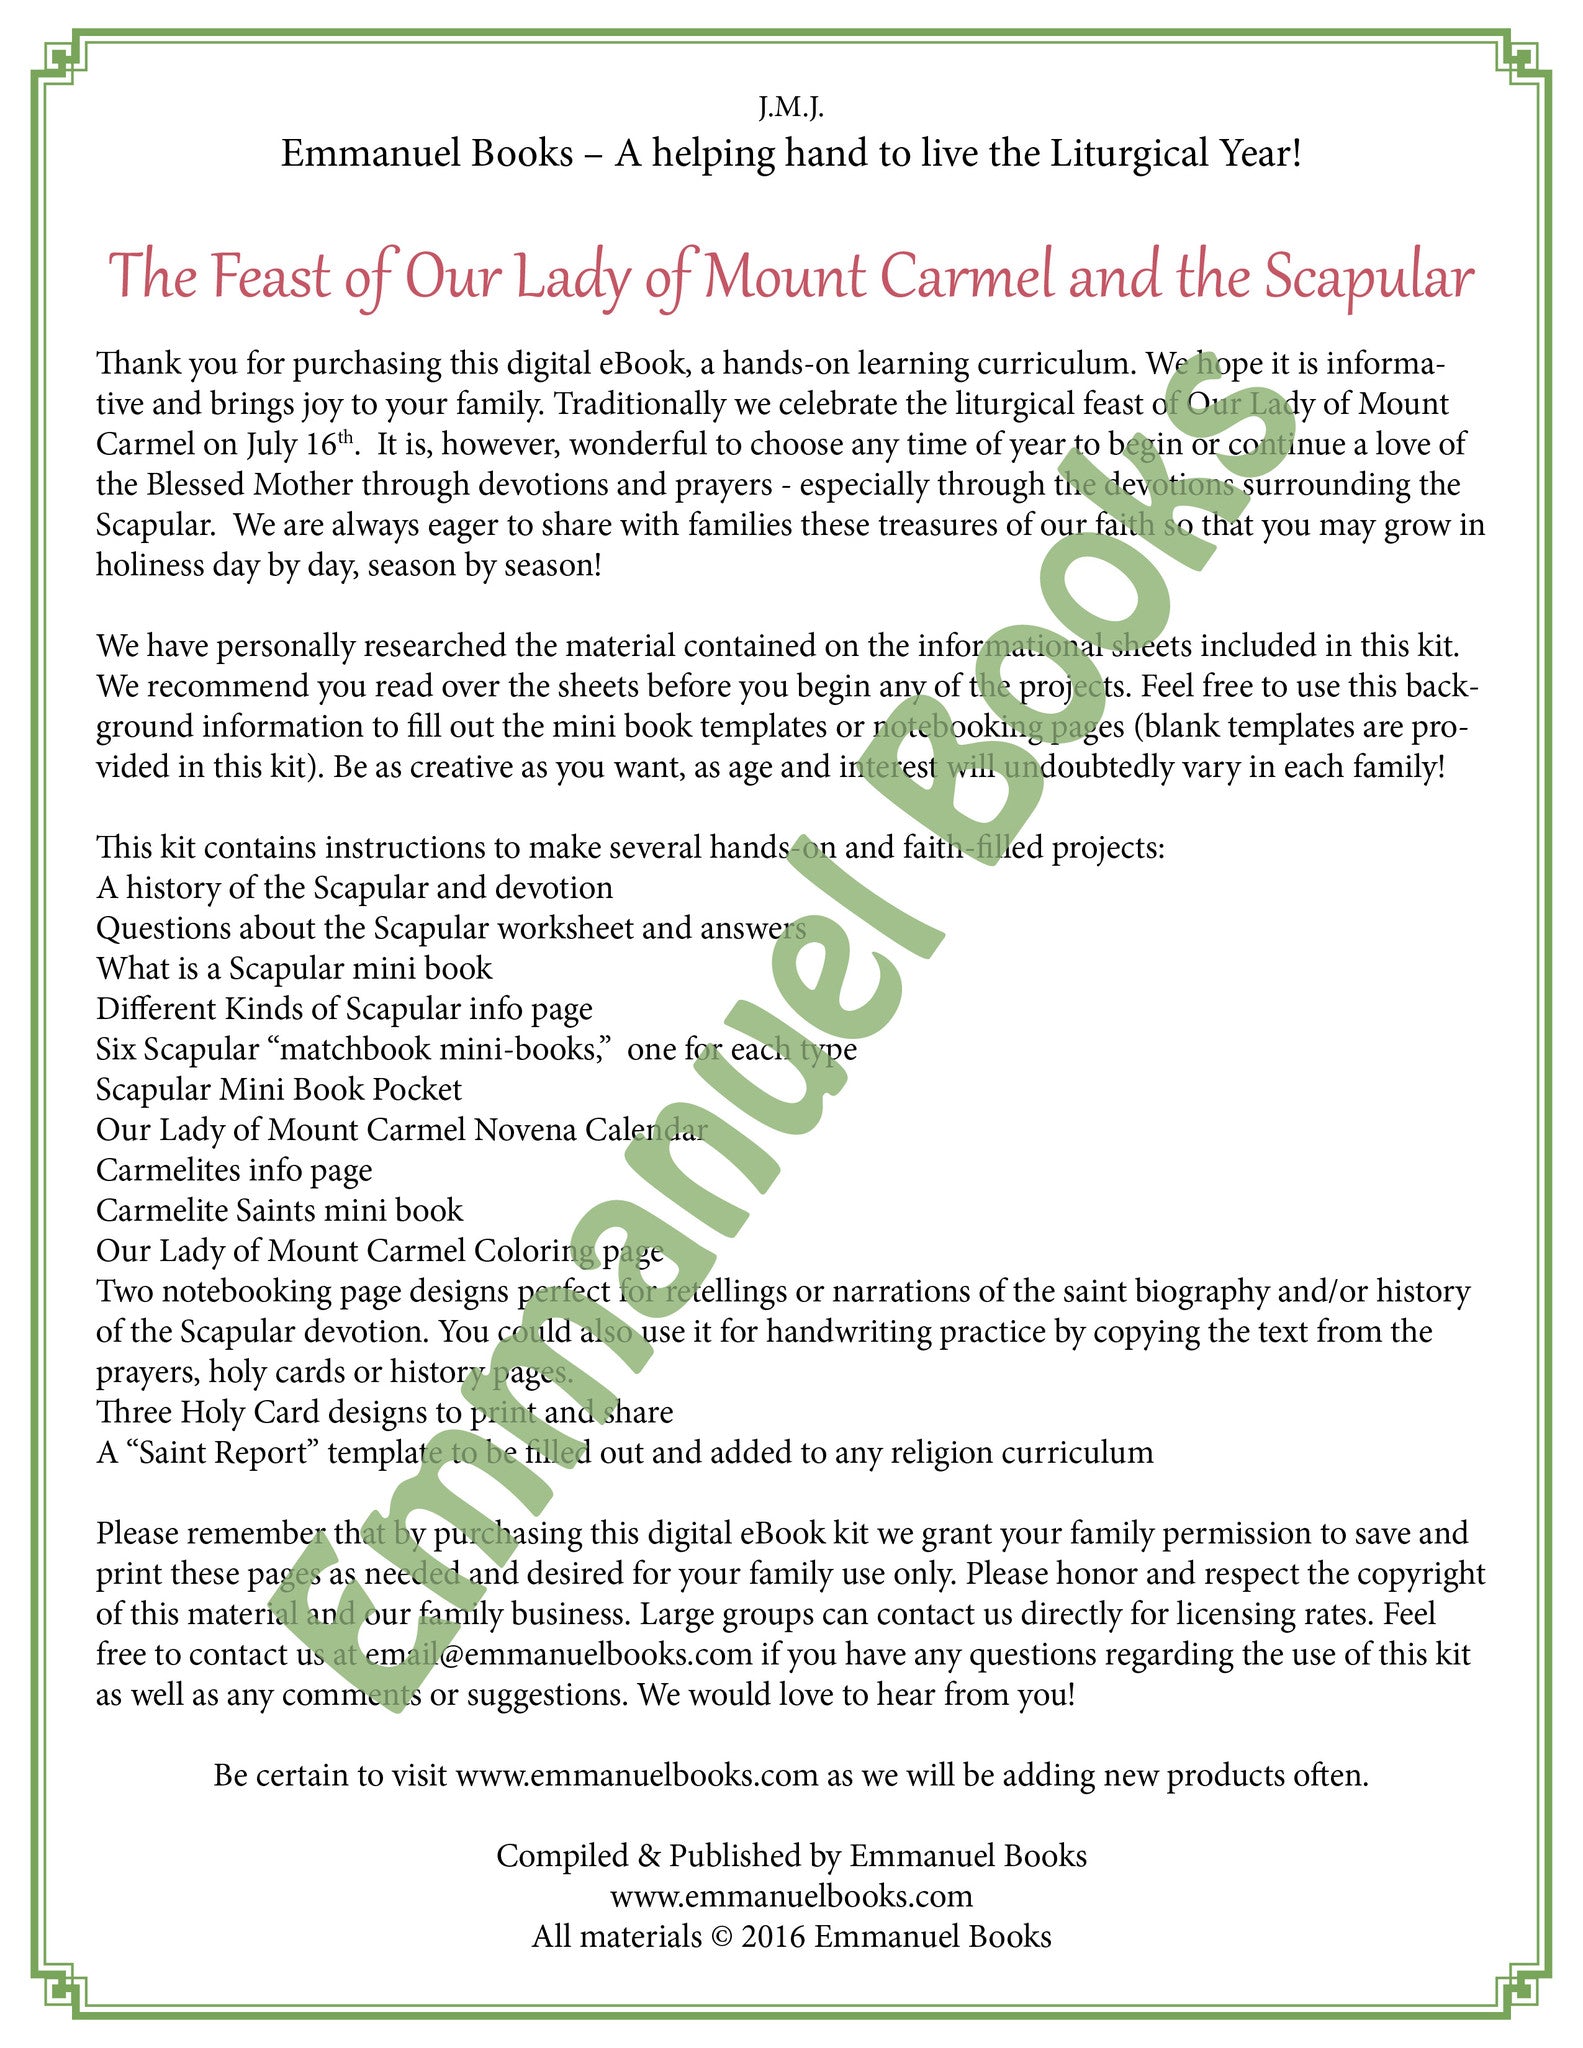 Our Lady of Mount Carmel and the Scapular Activity Packet Download